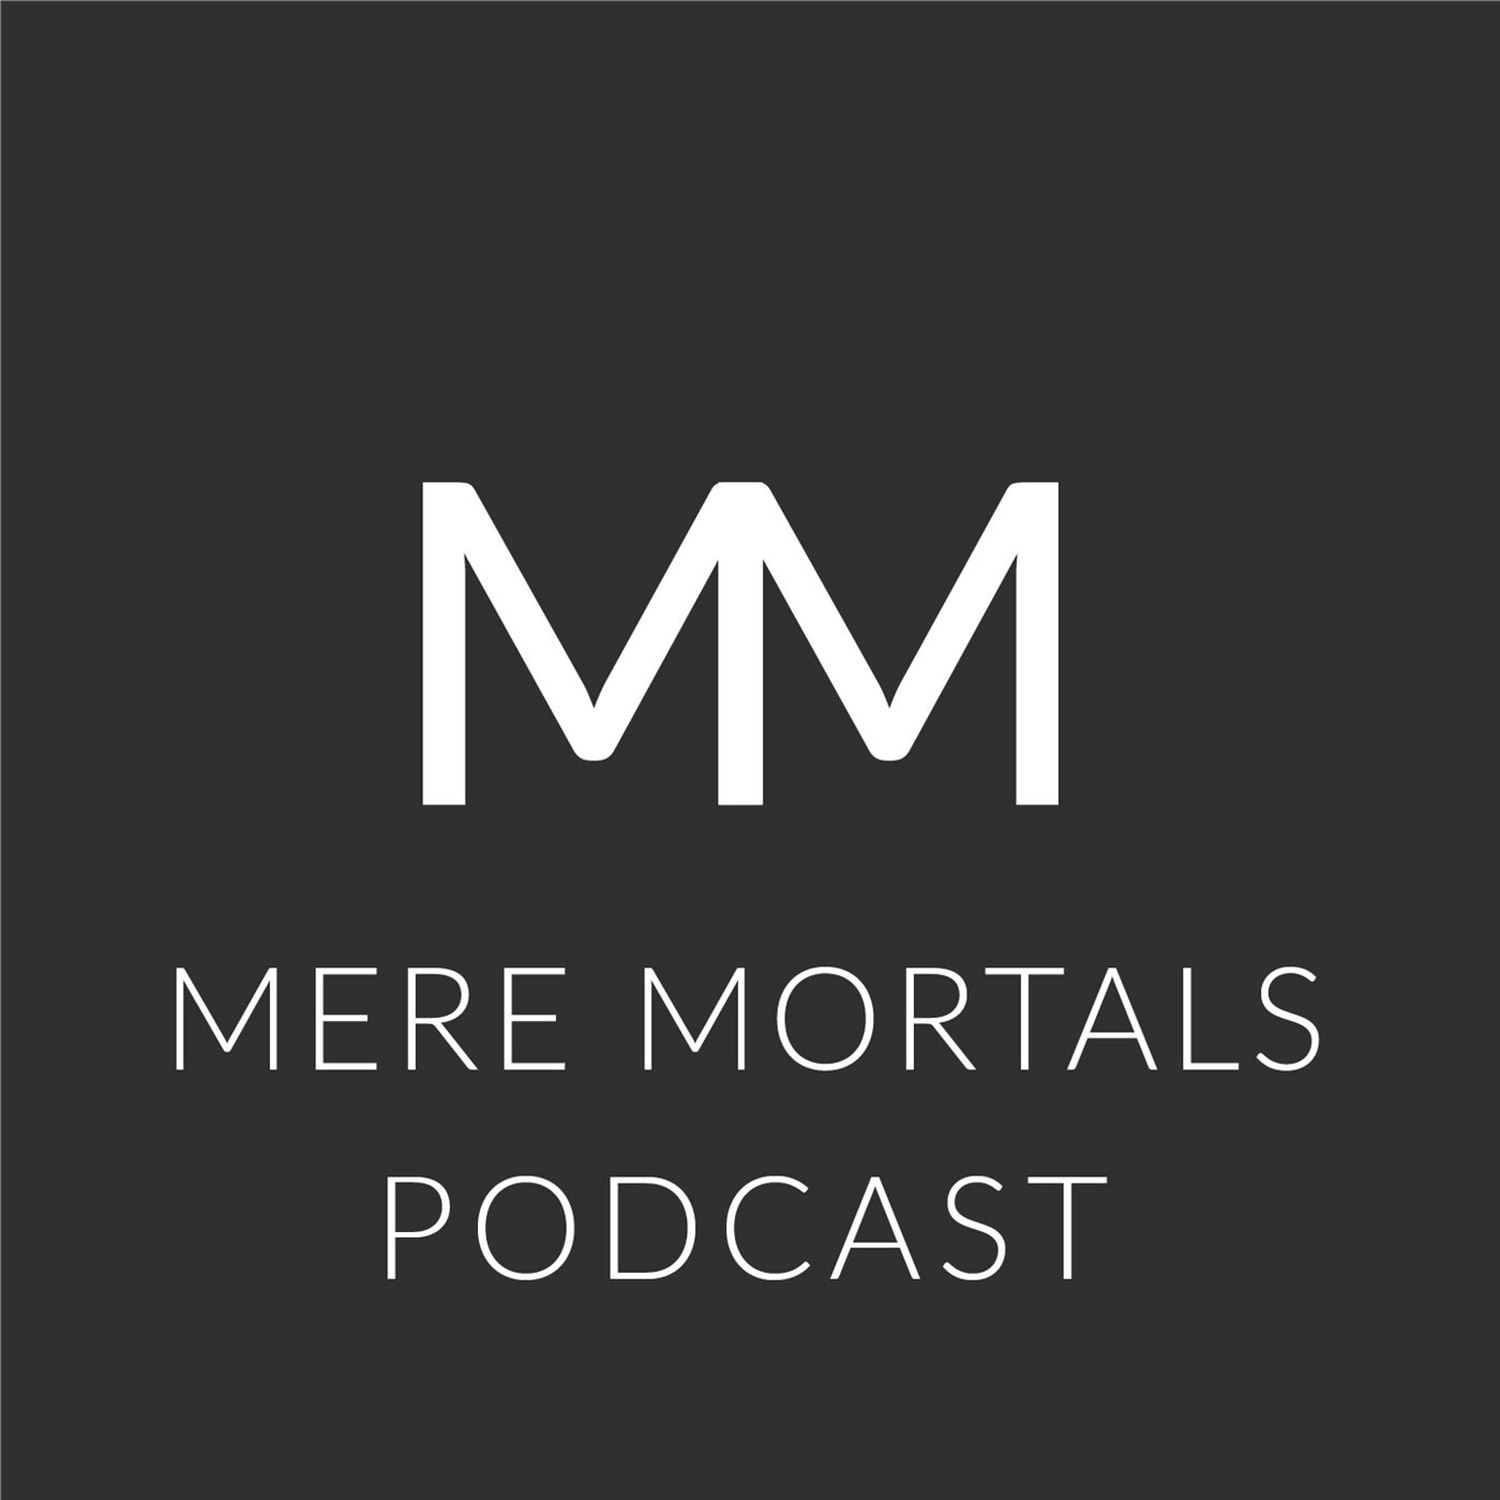 Striving For Excellence Through Life's Lessons (Mere Mortals Episode #68 - Excellence)